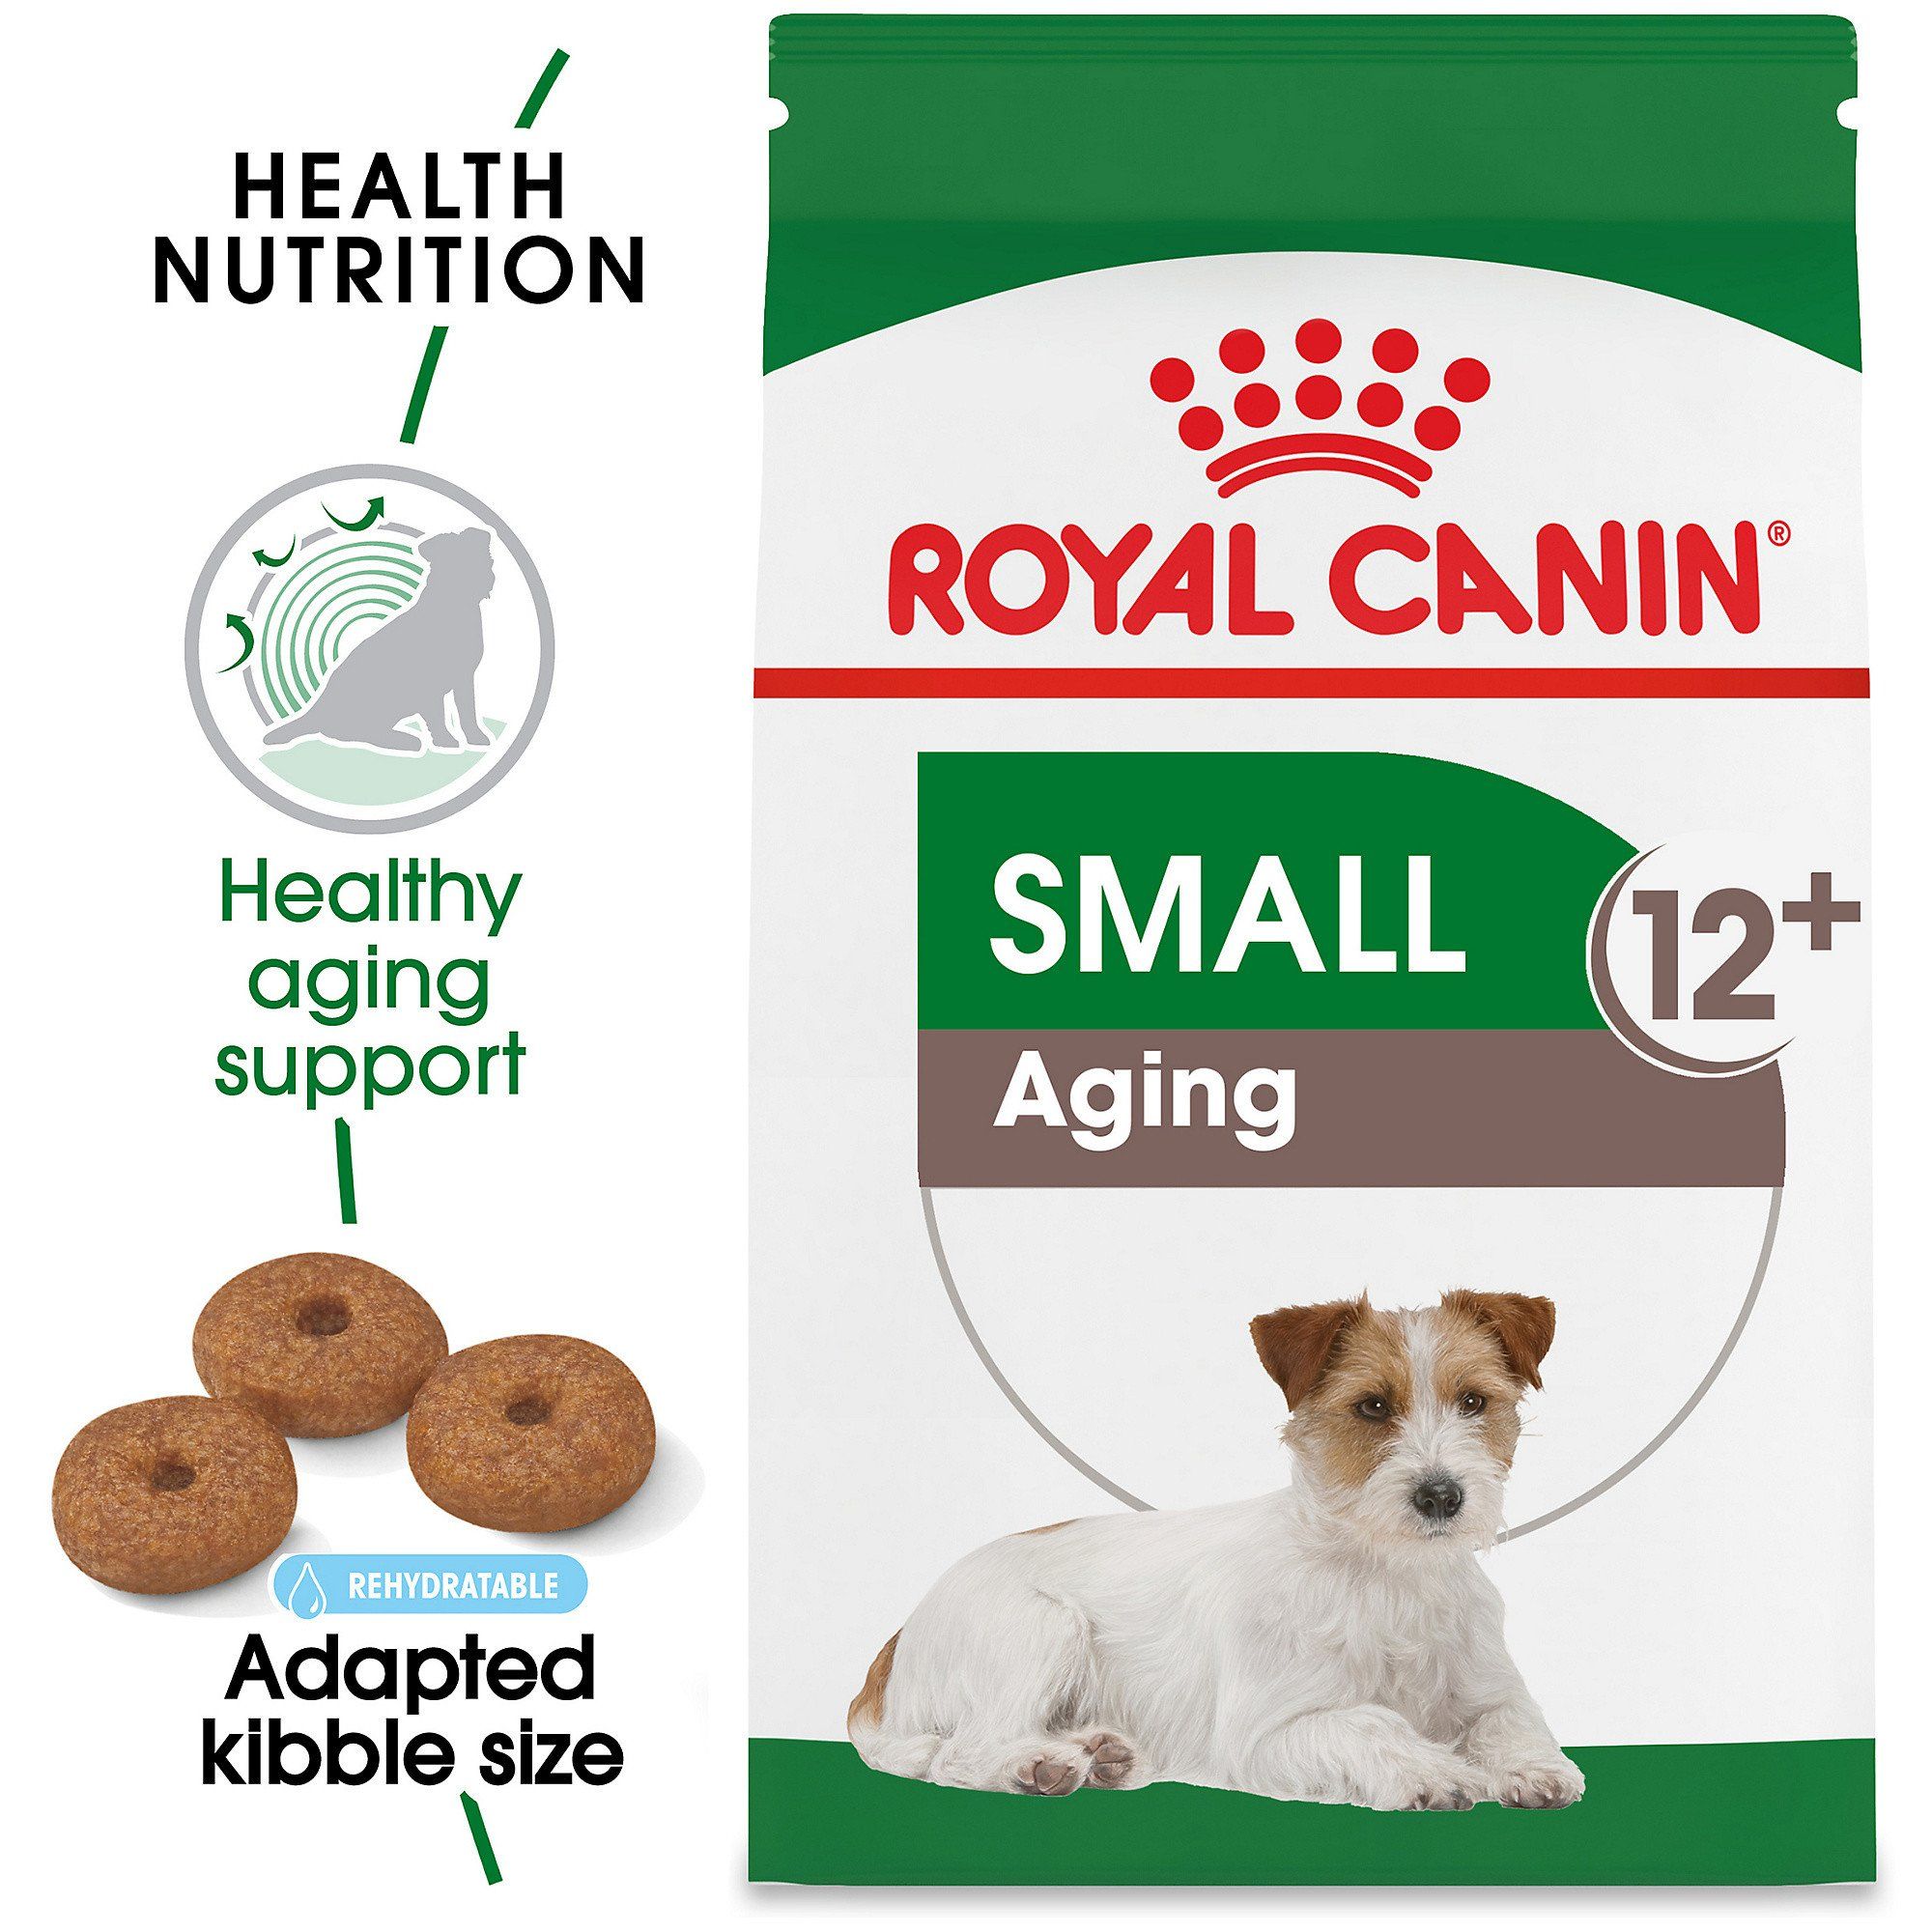 Royal Canin Small Aging 12+ Dry Dog Food for Senior Dogs, 2.5 lbs ...